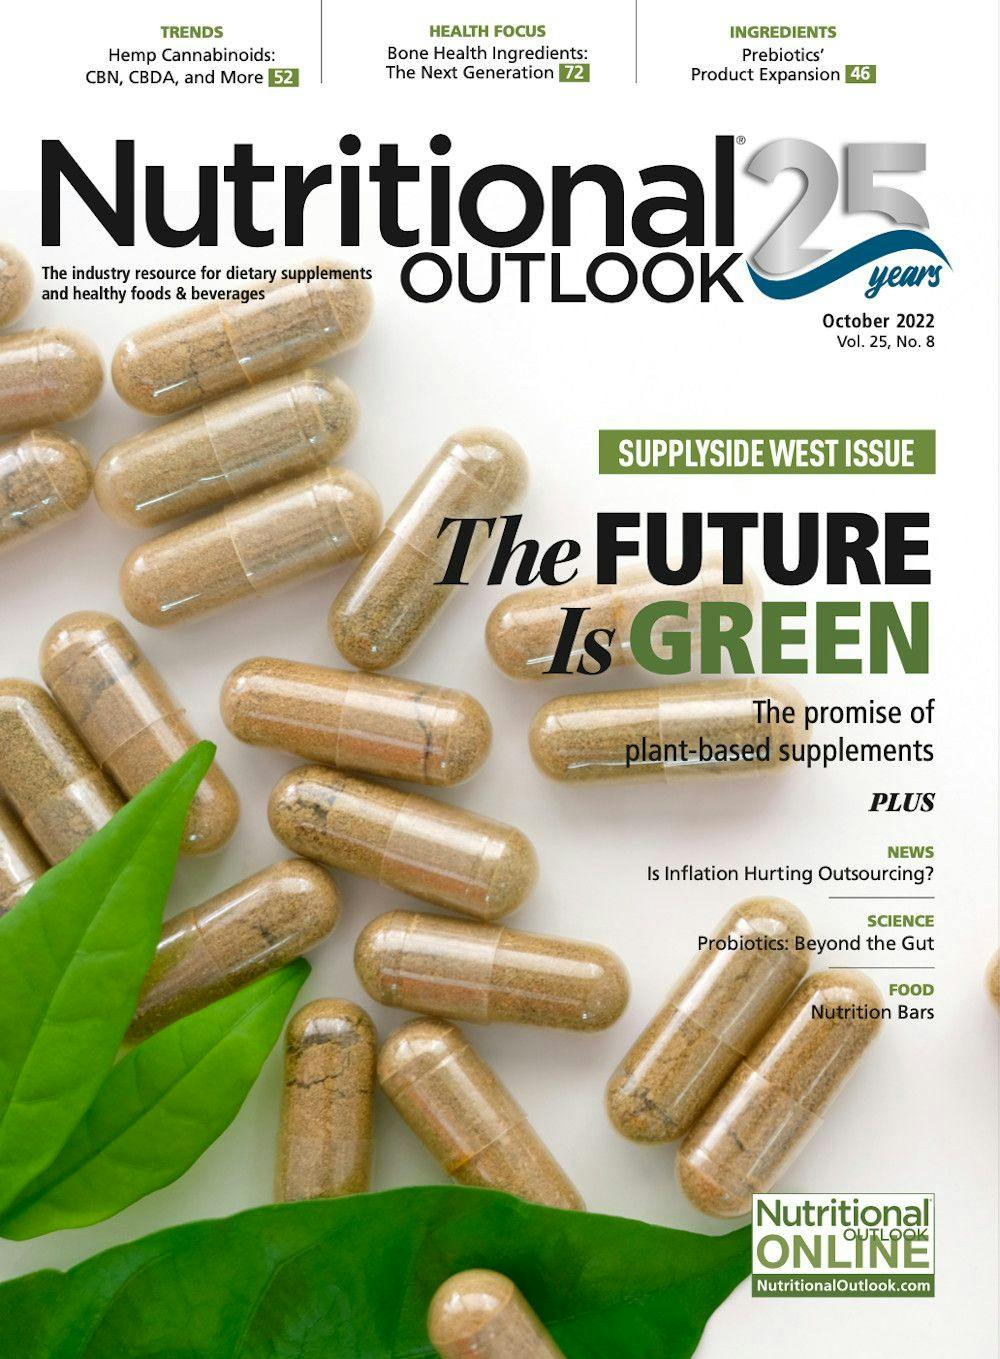 Nutritional Outlook Vol. 25 No. 8